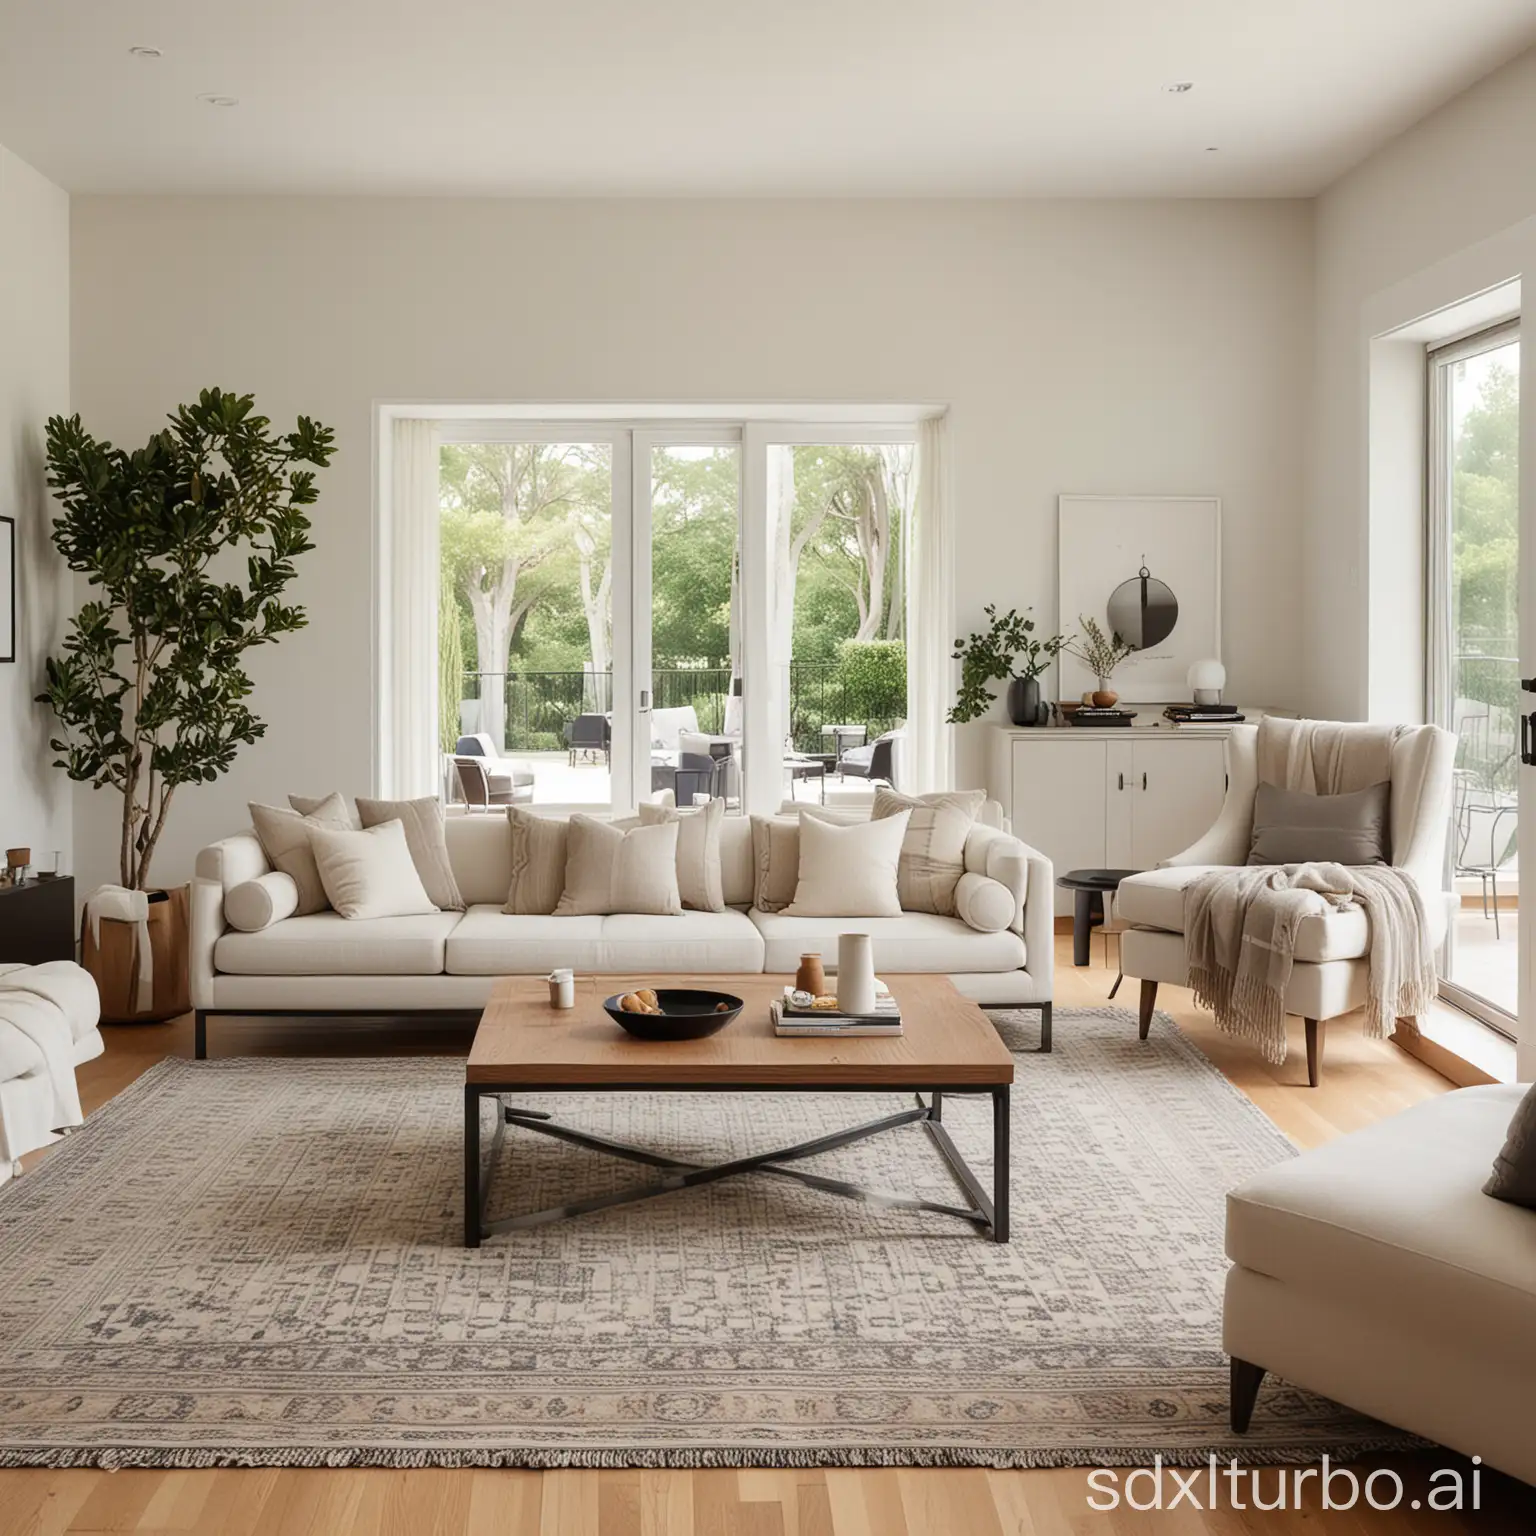 Modern-Living-Room-with-Comfortable-Couch-and-Armchairs-Sleek-and-Neutral-Design